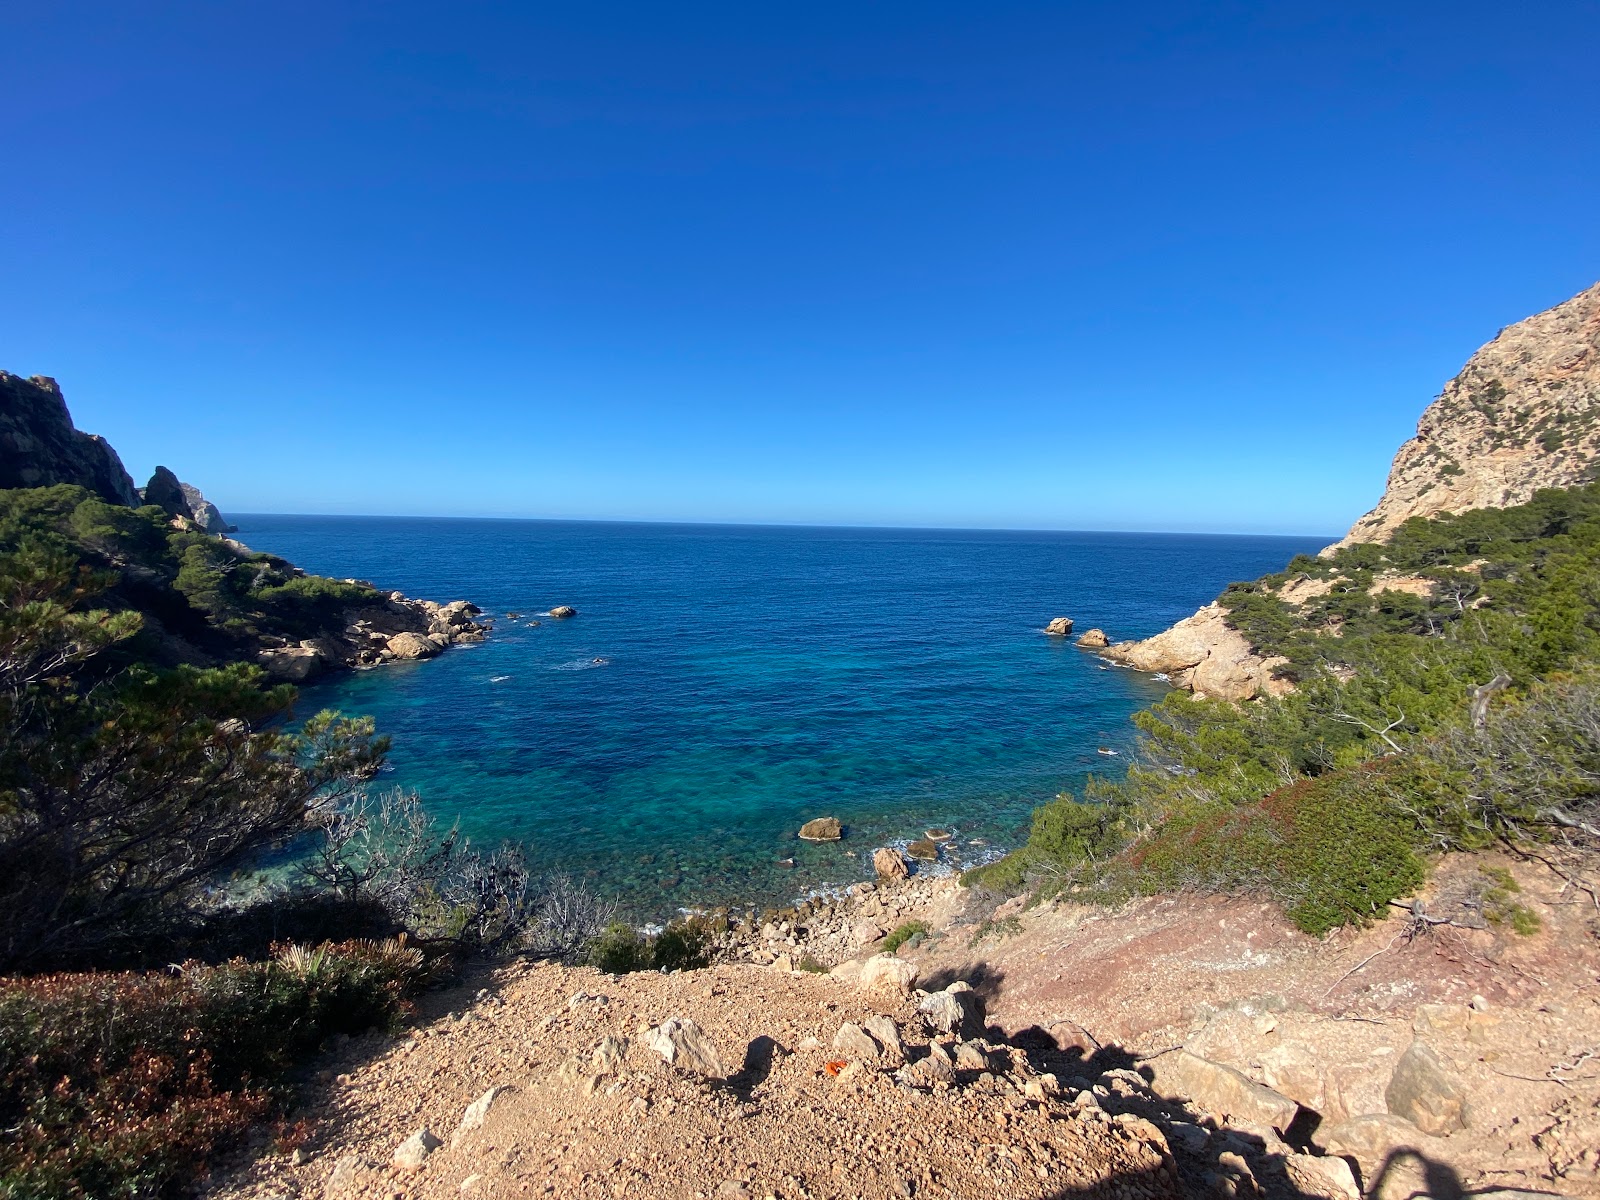 Photo of Cala en Basset backed by cliffs